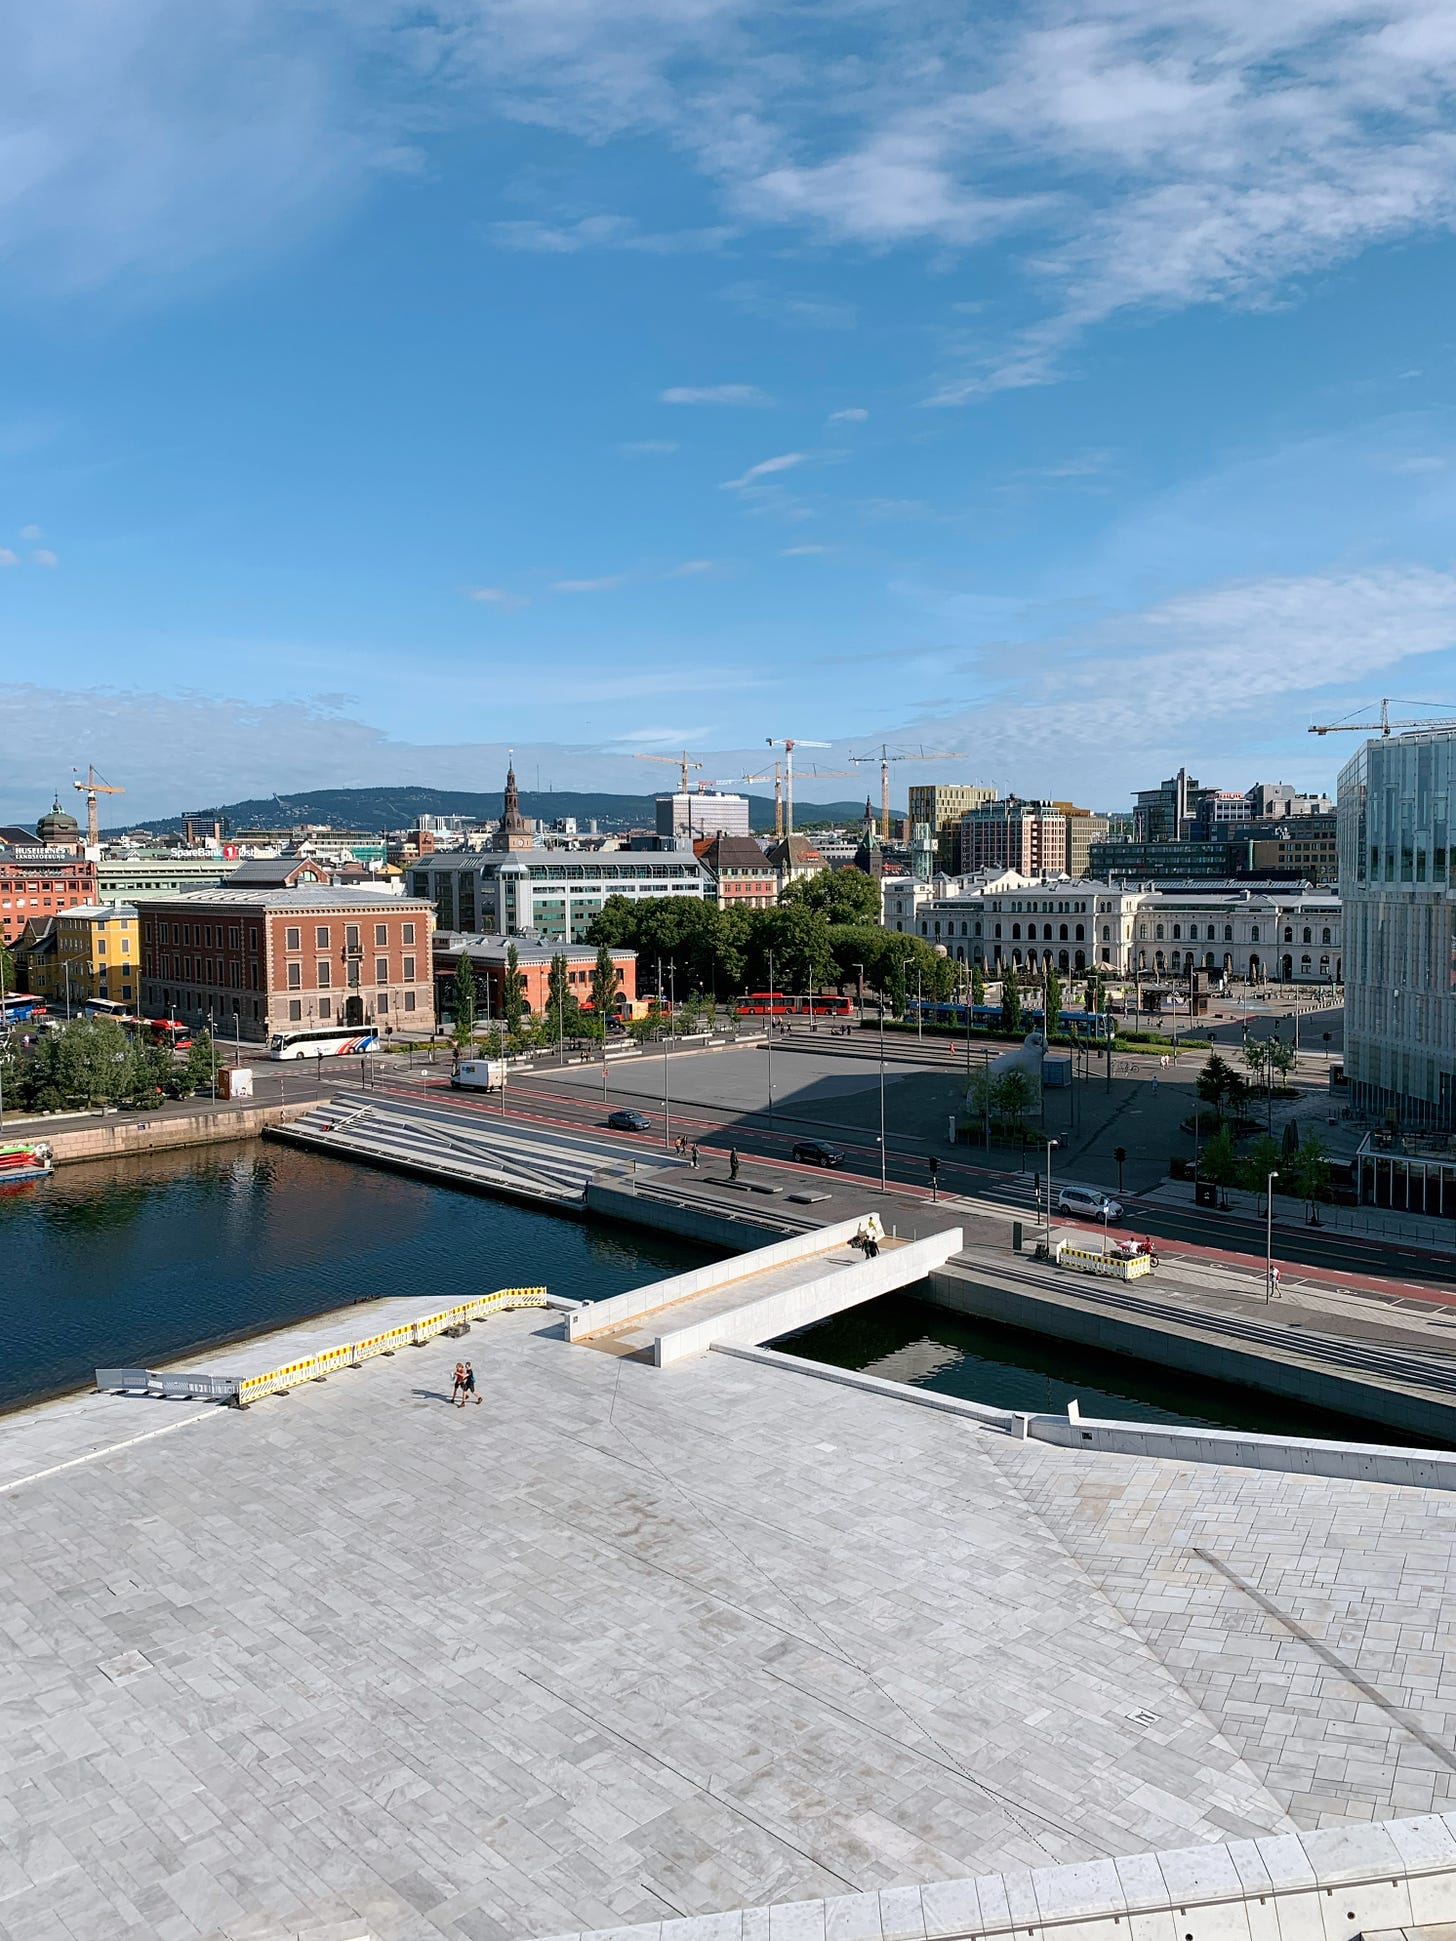 View of the city from the top of the Oslo Opera House